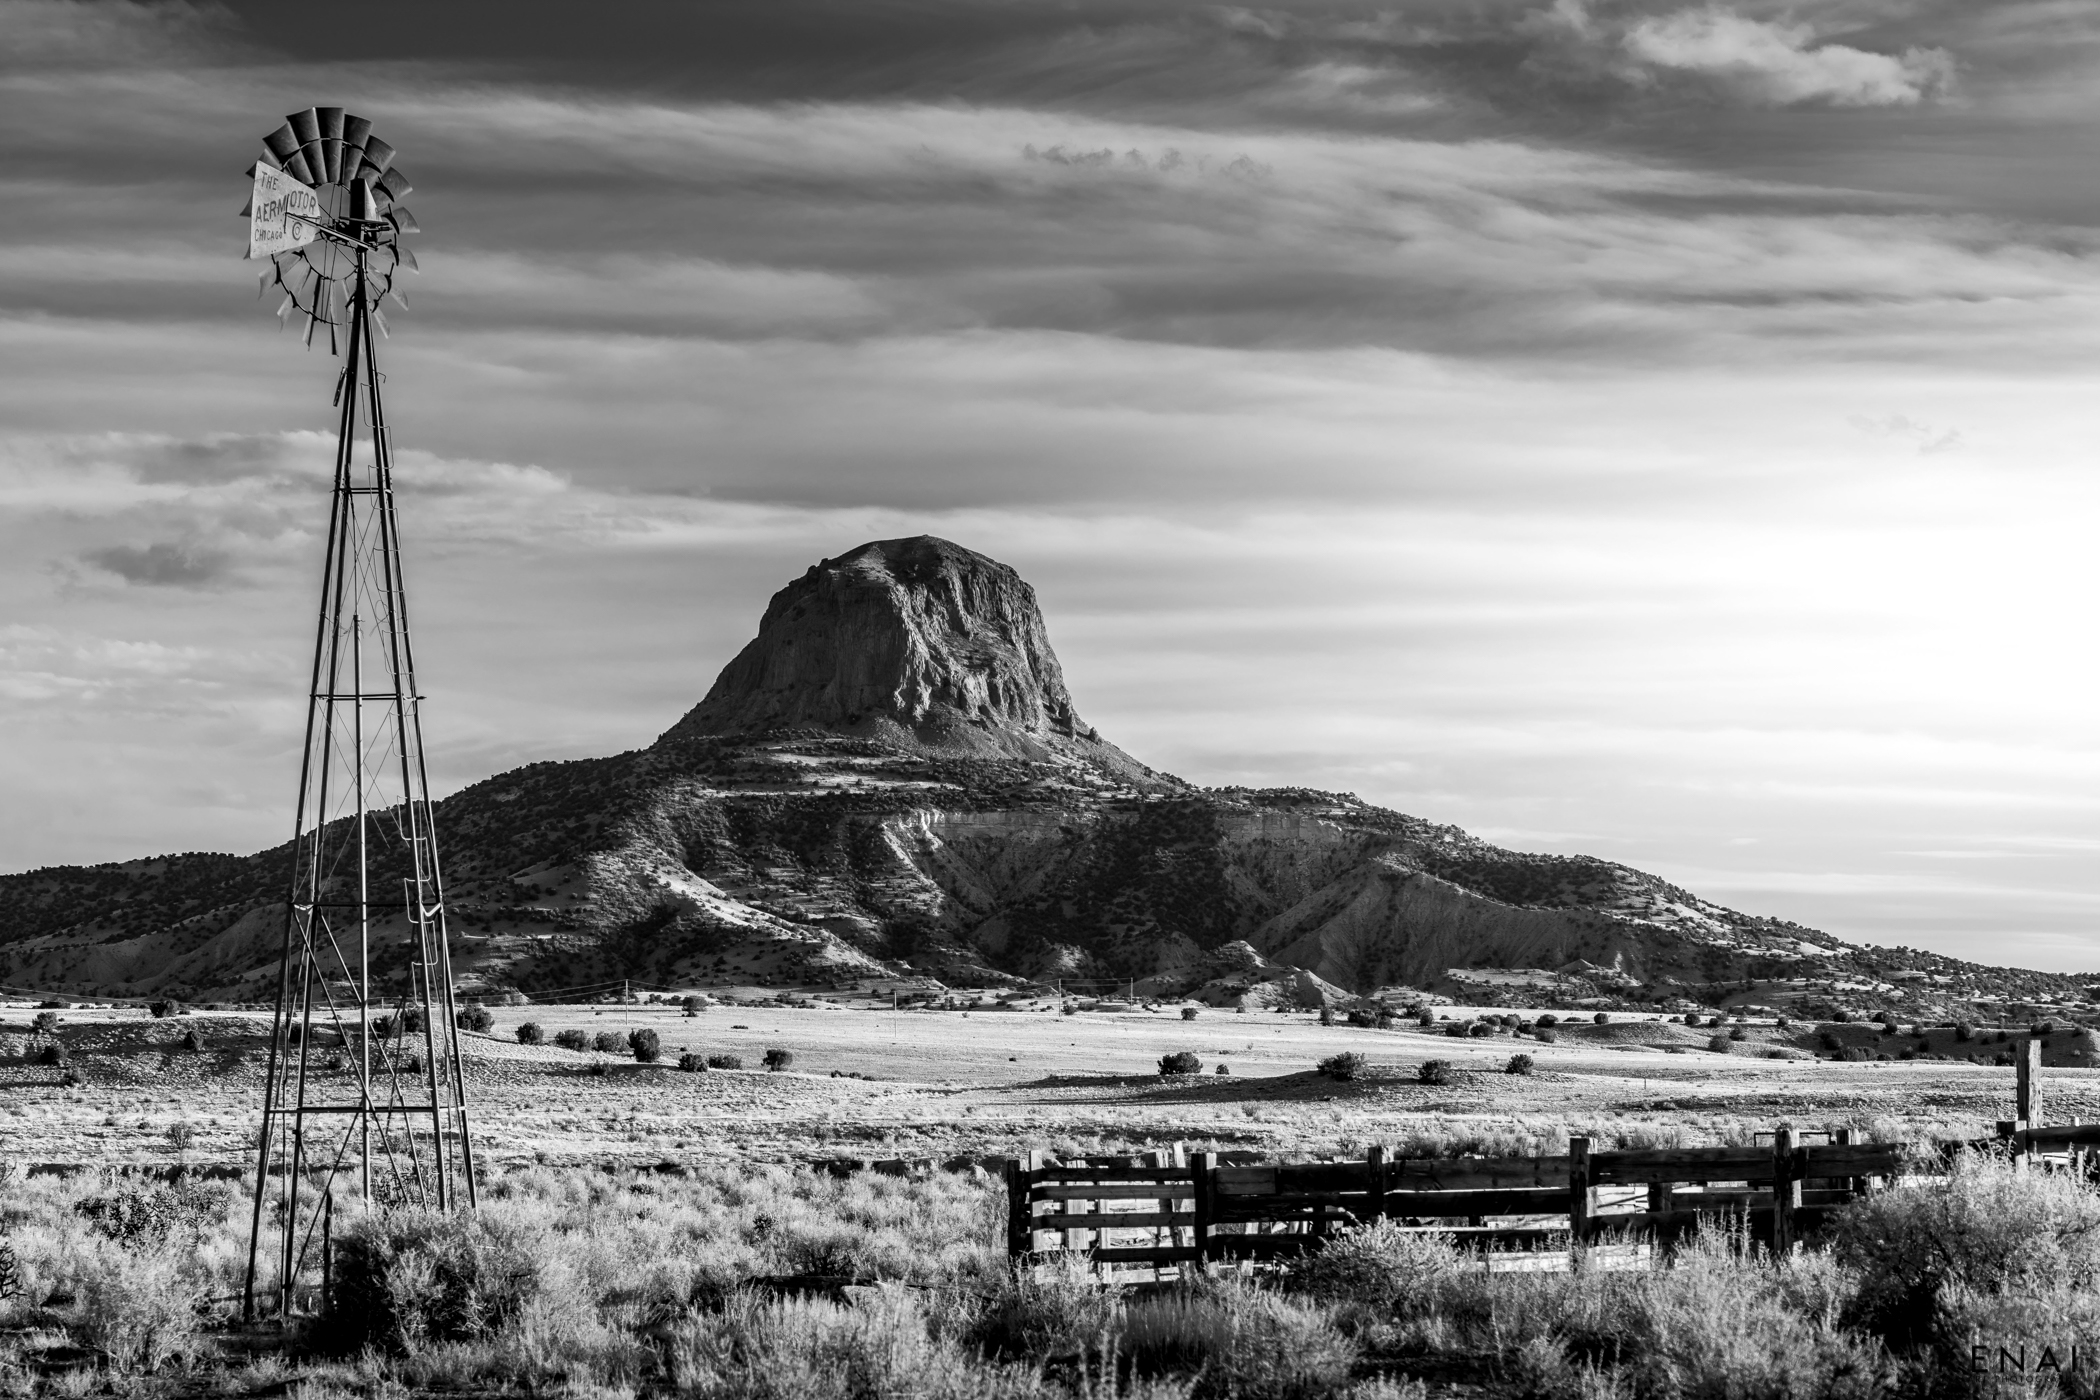 Cabezon volcanic plug rises high above the Rio Puerco valley in New Mexico